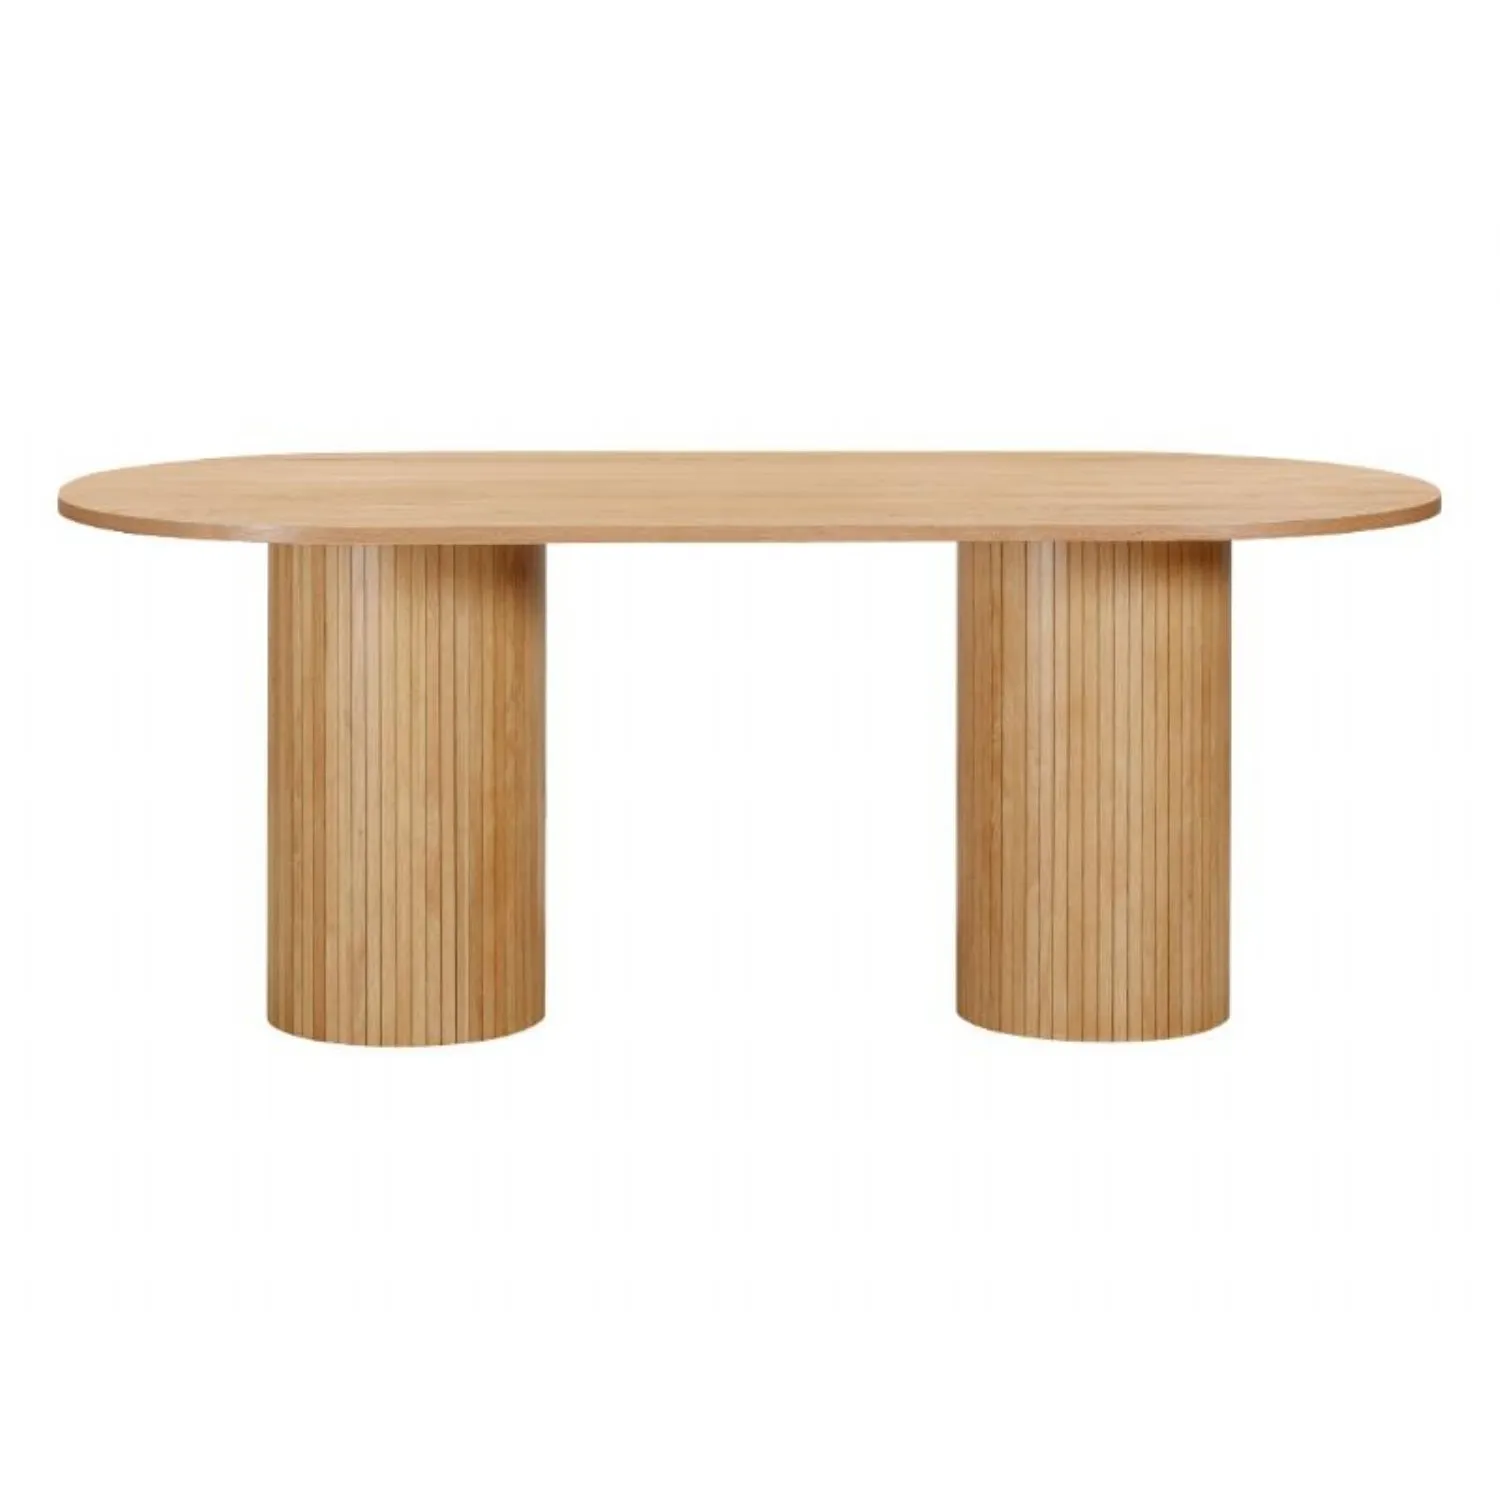 Vermont Oval Table 2000mm